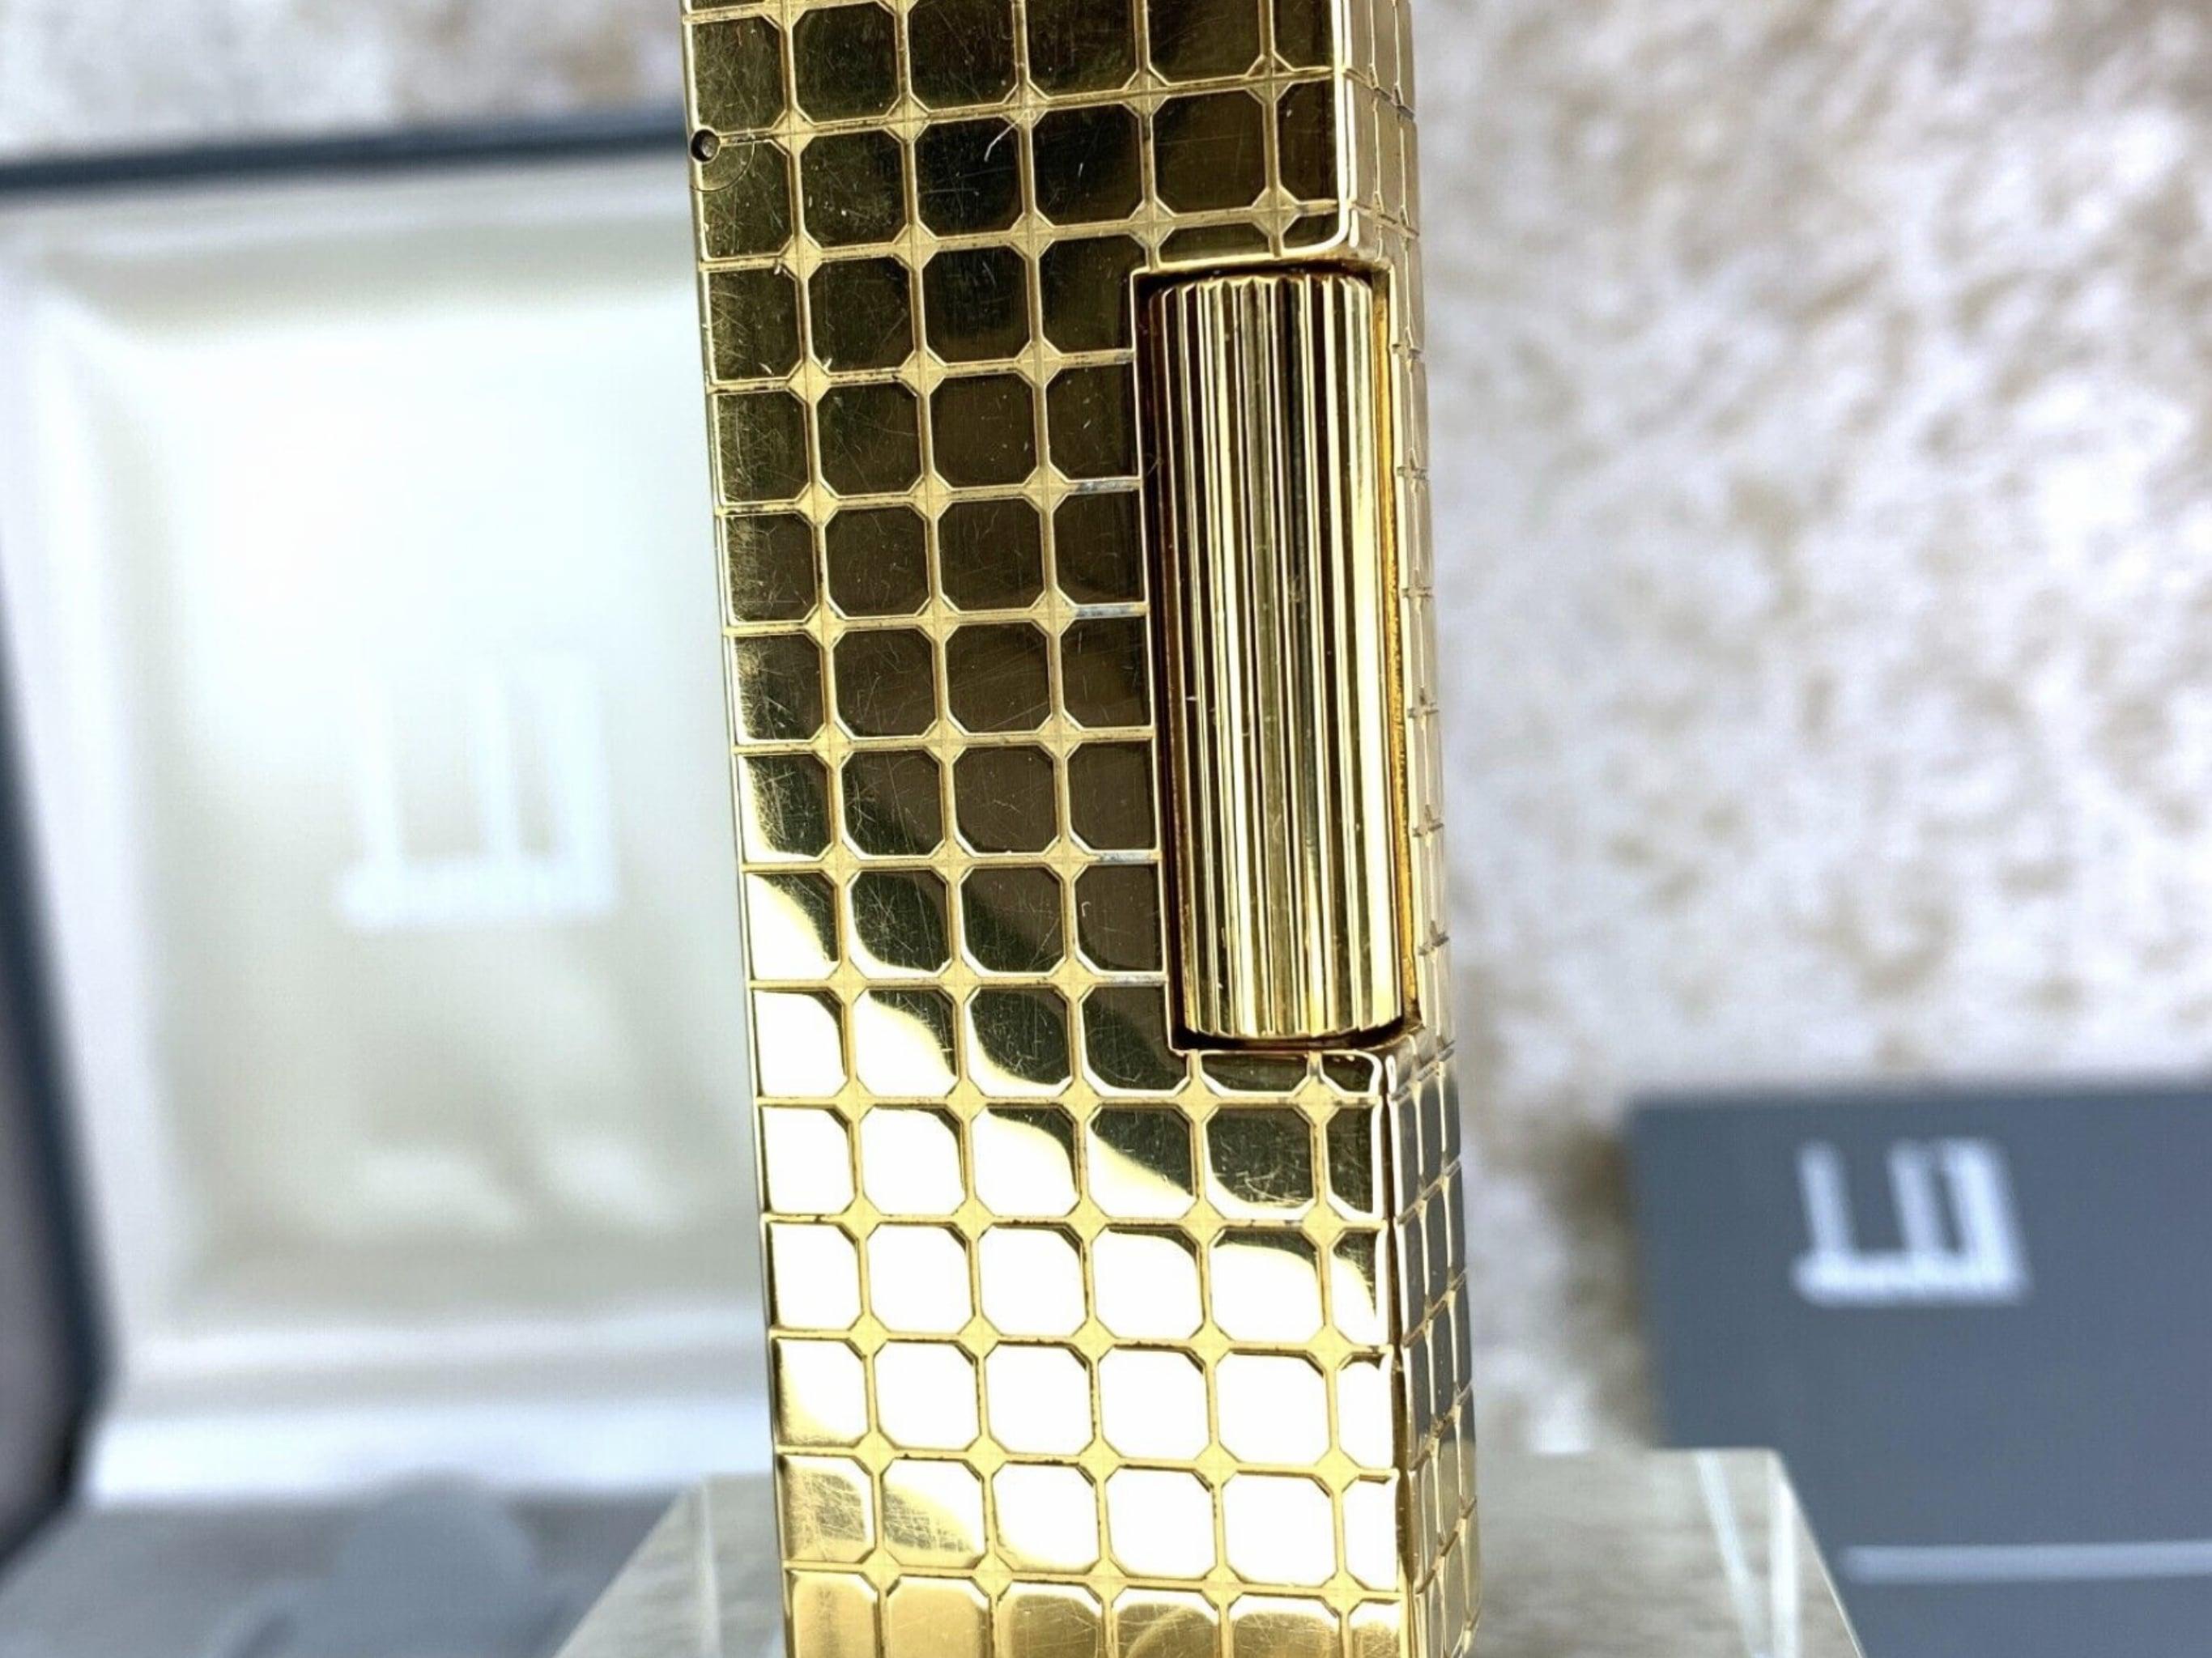 Vintage Dunhill Lighter Rare Gold Plated Block Texture
Very rare 
Circa 1990s
18K Gold plating 
With Original Dunhill Silver box and Case 
Original Dunhill papers 
Lighter sparks, ignites and flames 
In fantastic working condition
As good as new 